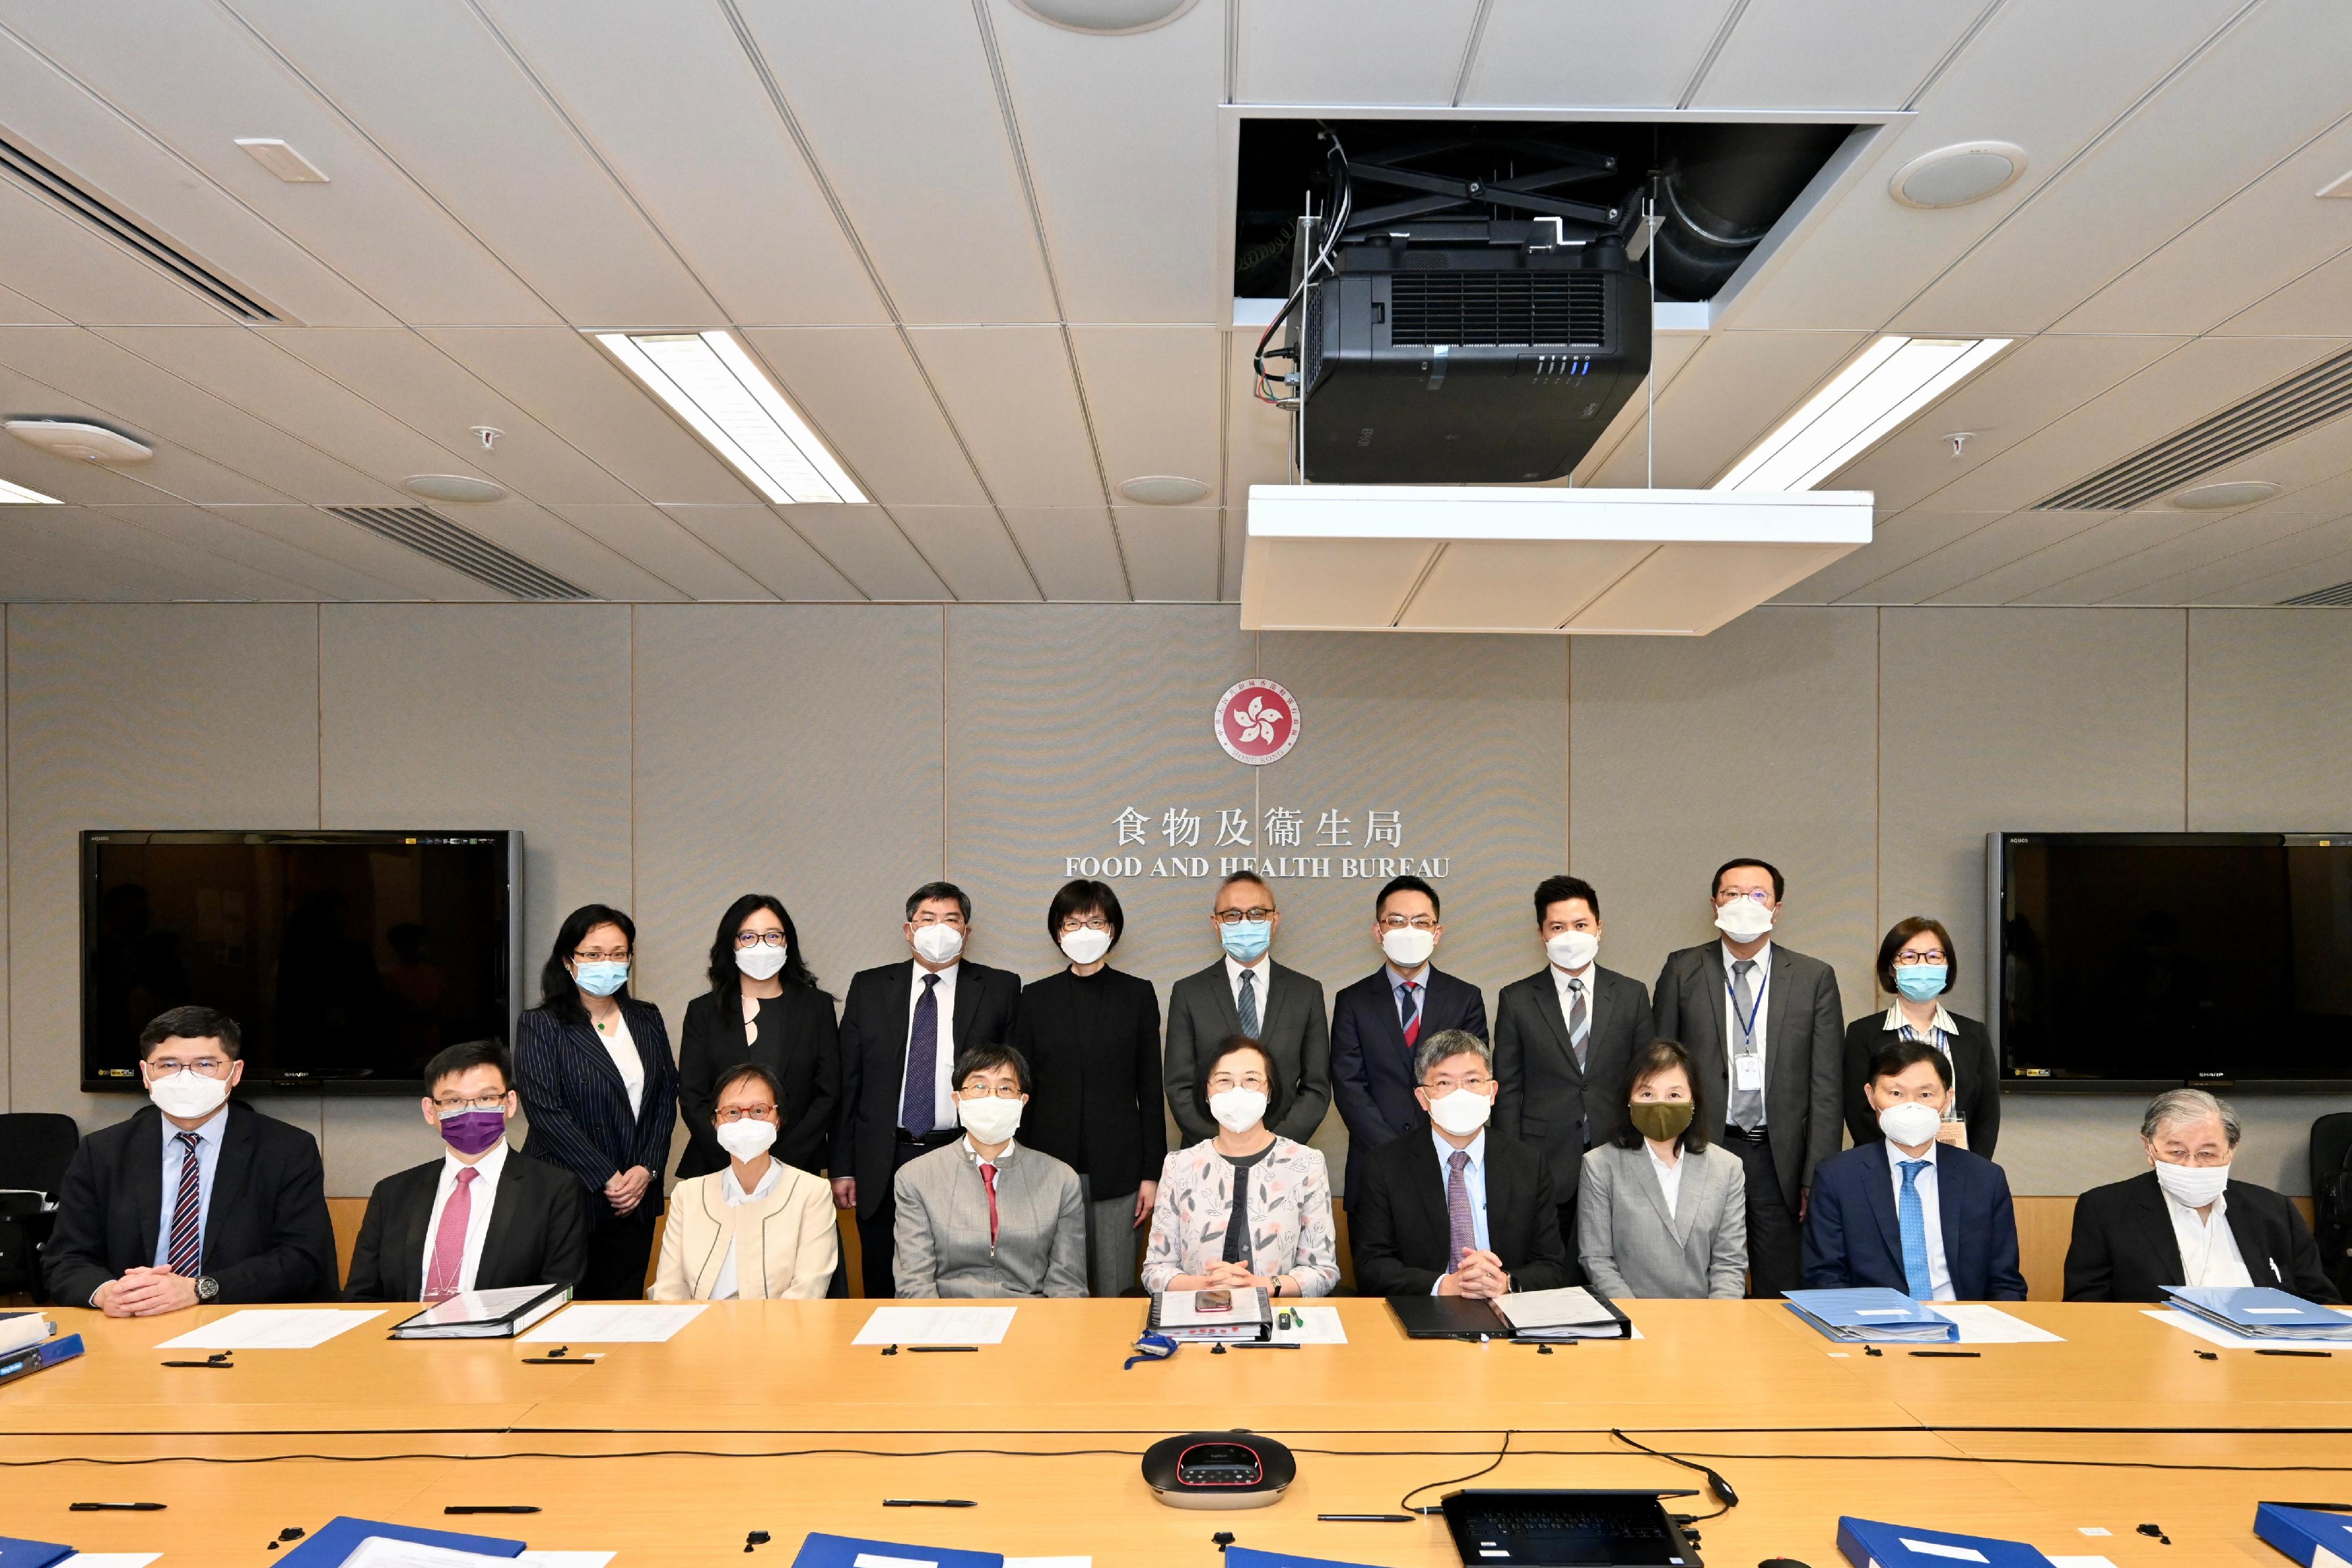 The Food and Health Bureau today (May 12) convened the seventh meeting of the High Level Steering Committee on Antimicrobial Resistance. Photo shows the Secretary for Food and Health, Professor Sophia Chan (front row, centre); the Permanent Secretary for Food and Health (Health), Mr Thomas Chan (front row, fourth right); the Permanent Secretary for Food and Health (Food), Miss Vivian Lau (back row, fourth left); members of the Committee, Ms Sabrina Chan (front row, third right) and Professor Yuen Kwok-yung (front row, fourth left); institutional members of the Committee and other officials taking a group photo before the meeting.
